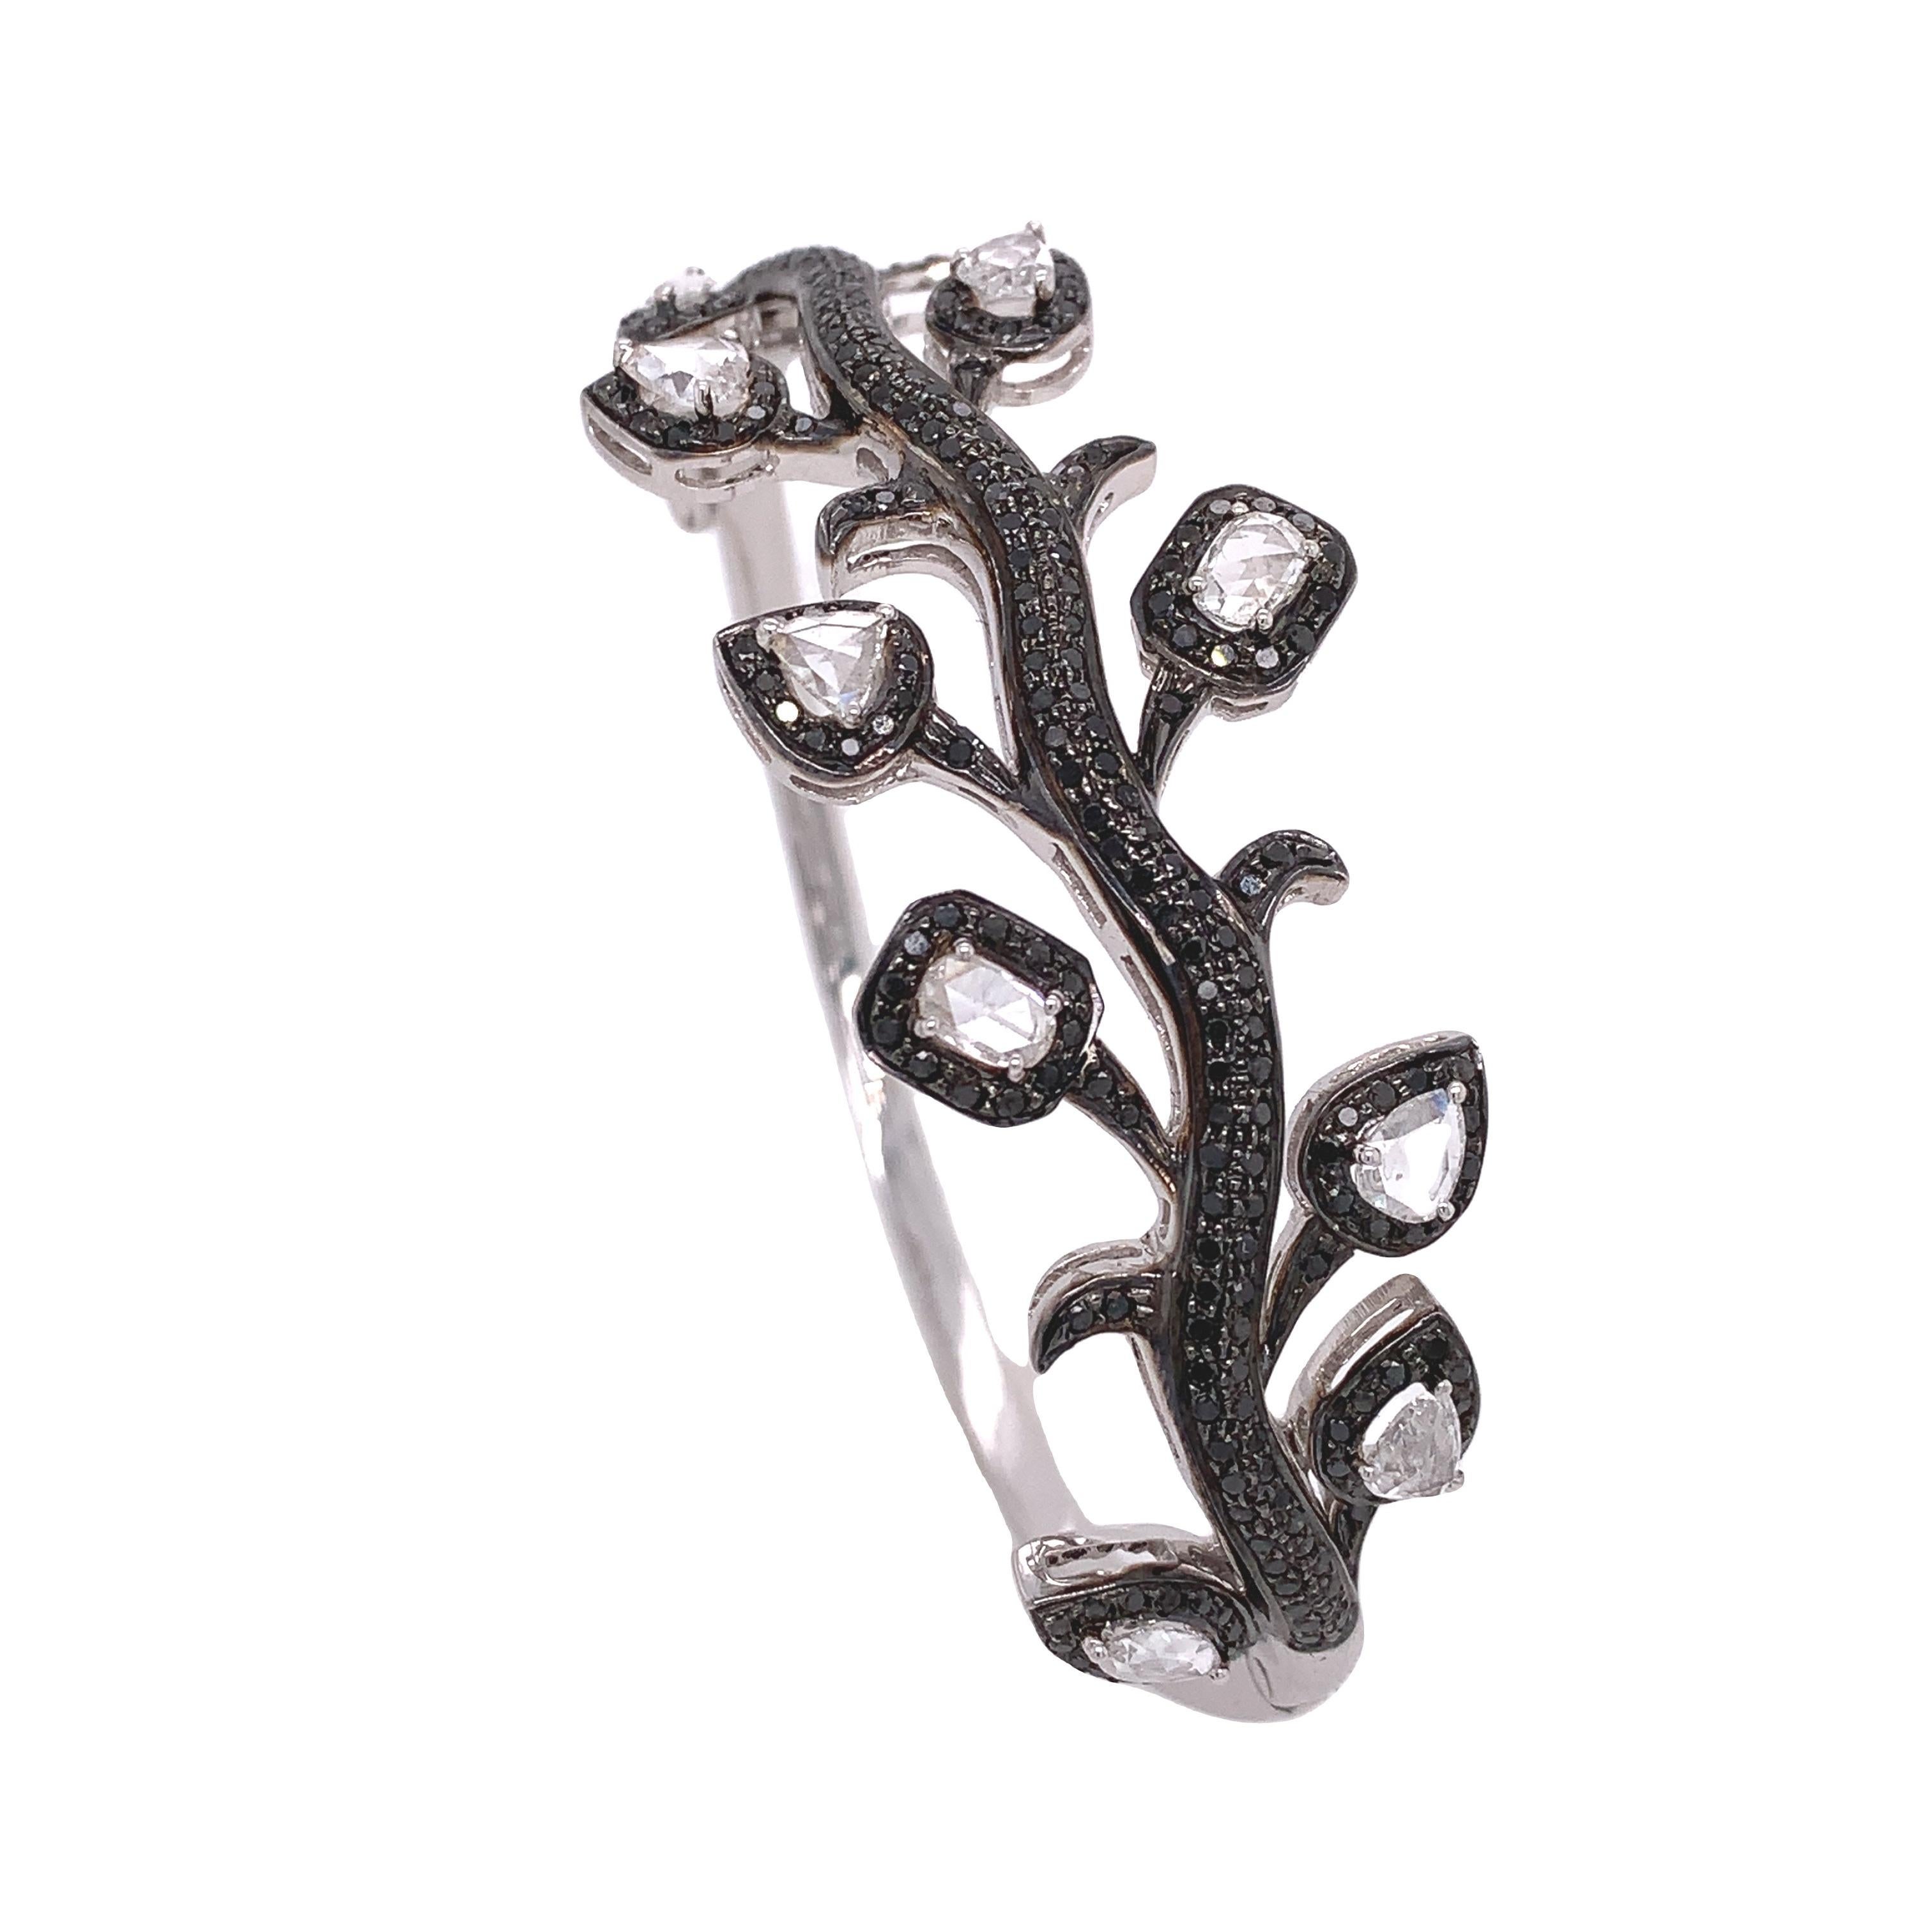 18K White Gold with Tinted Black Rhodium.
Diamonds: 3.46ct total weight.
All diamonds are G-H/SI stones.
Width of leaves - is approximately 2.4cm/0.95inches.